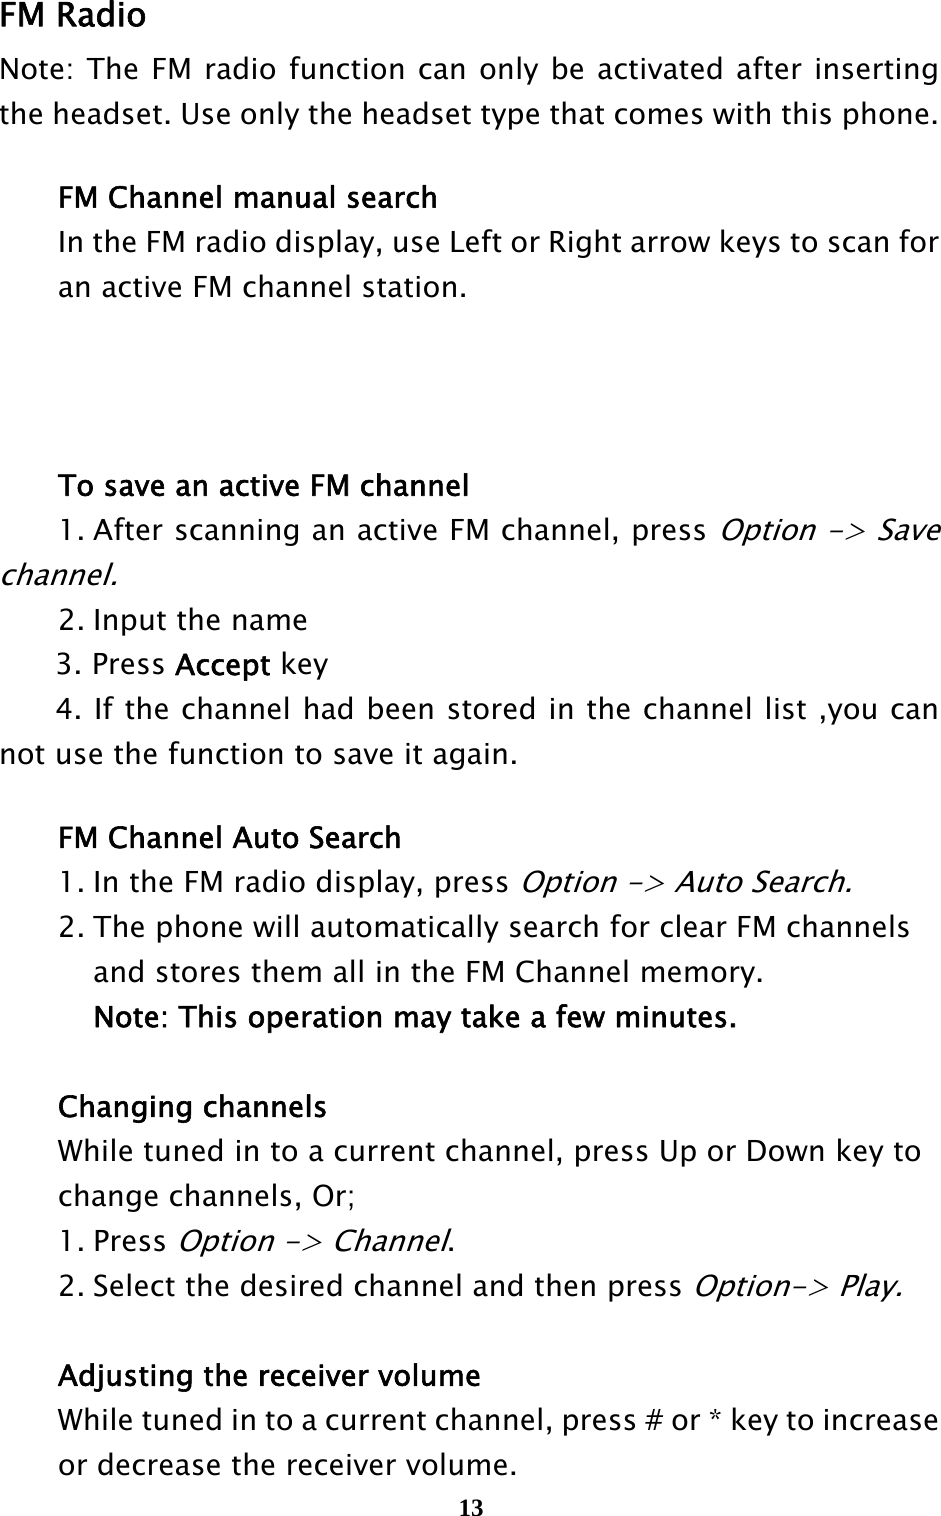  13 FM Radio   Note: The FM radio function can only be activated after inserting the headset. Use only the headset type that comes with this phone.   FM Channel manual search   In the FM radio display, use Left or Right arrow keys to scan for     an active FM channel station.        To save an active FM channel   1. After scanning an active FM channel, press Option -&gt; Save channel.    2. Input the name 3. Press Accept key 4. If the channel had been stored in the channel list ,you can not use the function to save it again.    FM Channel Auto Search   1. In the FM radio display, press Option -&gt; Auto Search.    2. The phone will automatically search for clear FM channels     and stores them all in the FM Channel memory.       Note: This operation may take a few minutes.   Changing channels  While tuned in to a current channel, press Up or Down key to     change channels, Or;  1. Press Option -&gt; Channel.   2. Select the desired channel and then press Option-&gt; Play.     Adjusting the receiver volume   While tuned in to a current channel, press # or * key to increase     or decrease the receiver volume. 